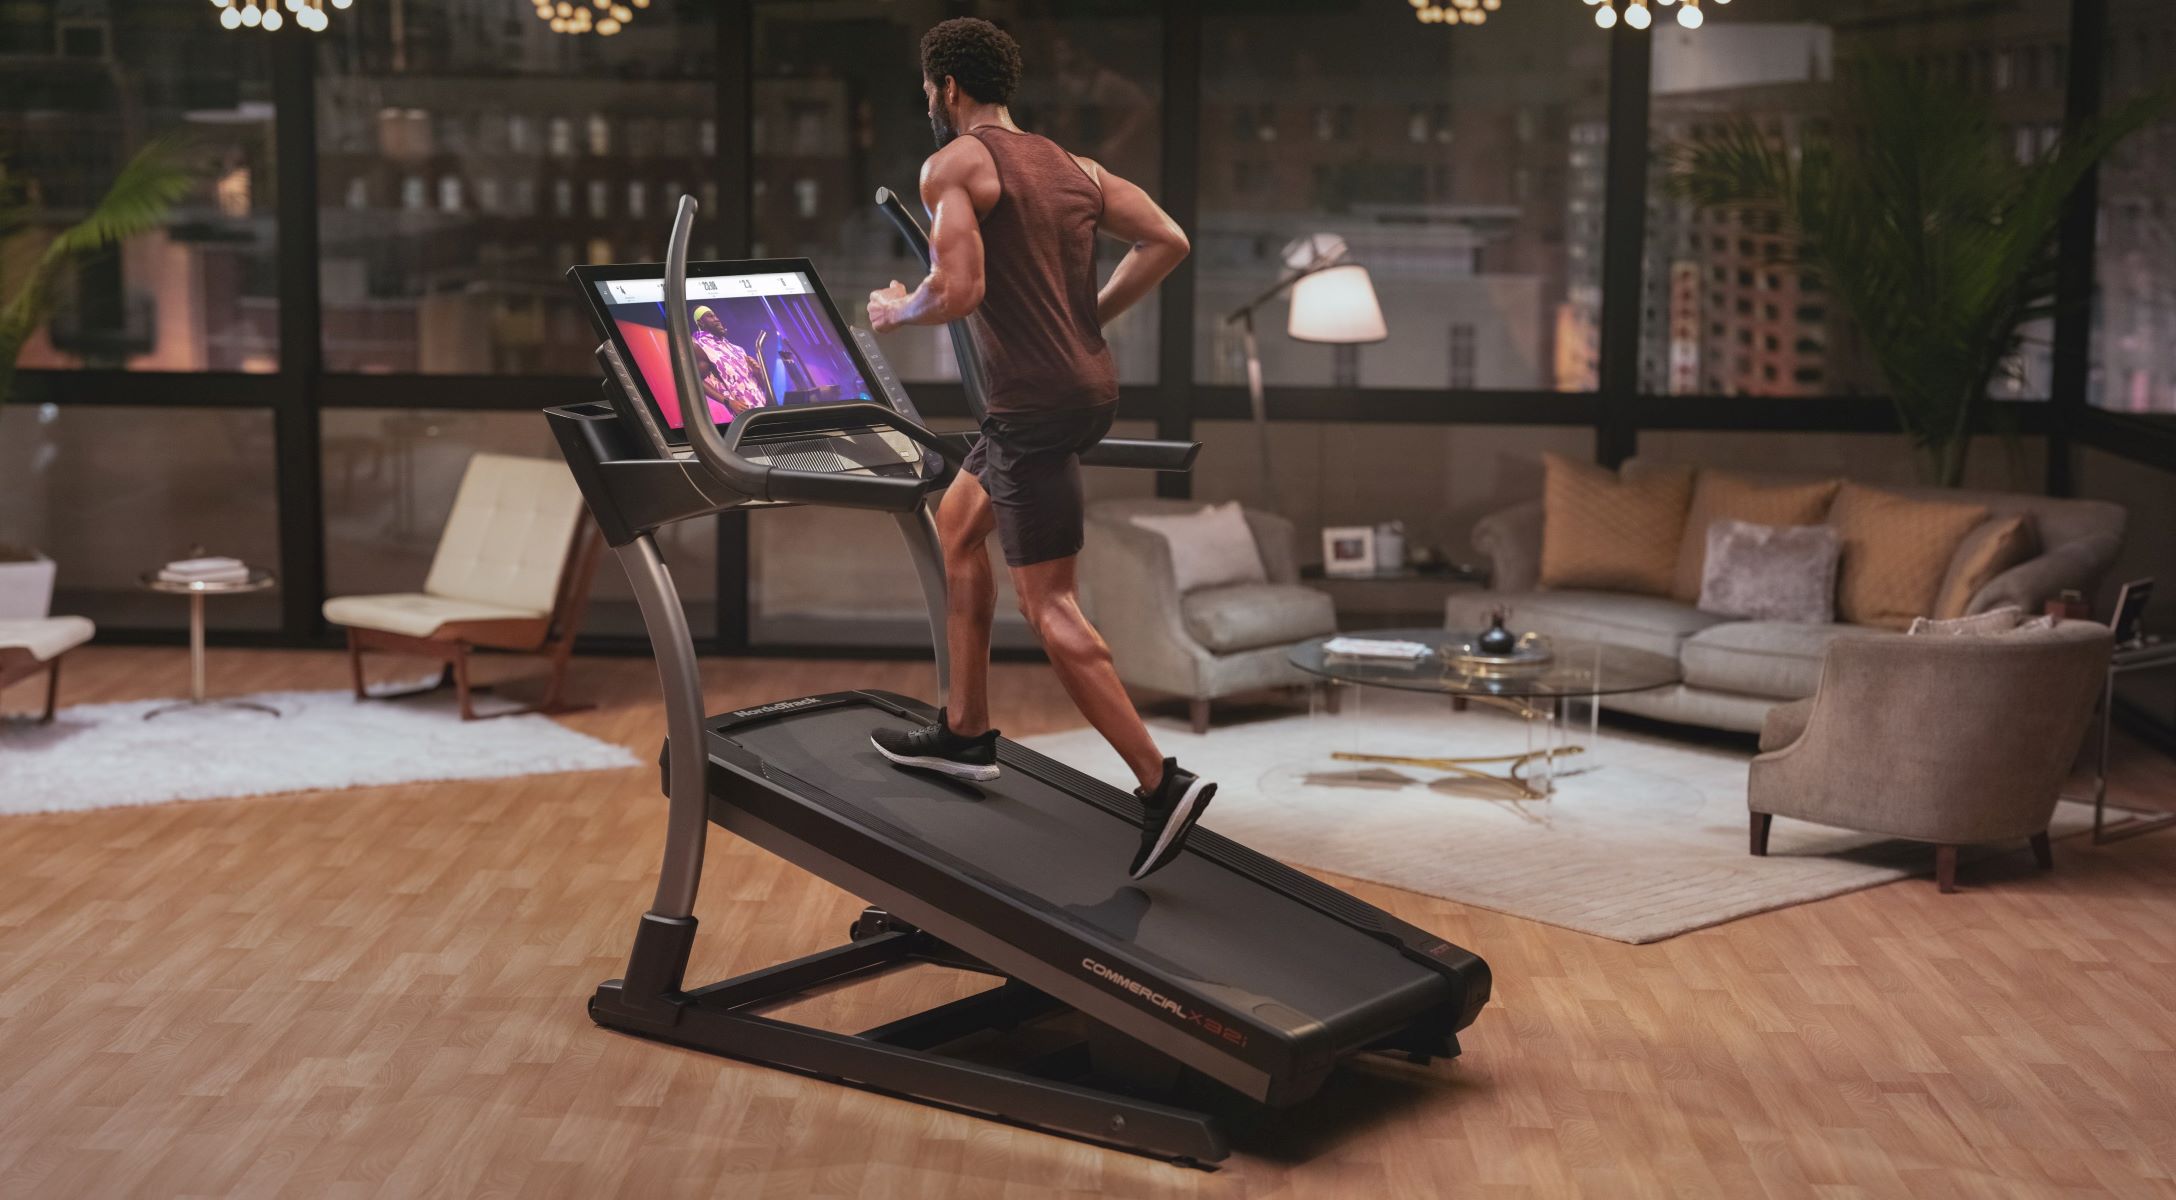 How Heavy Is A Nordictrack Treadmill